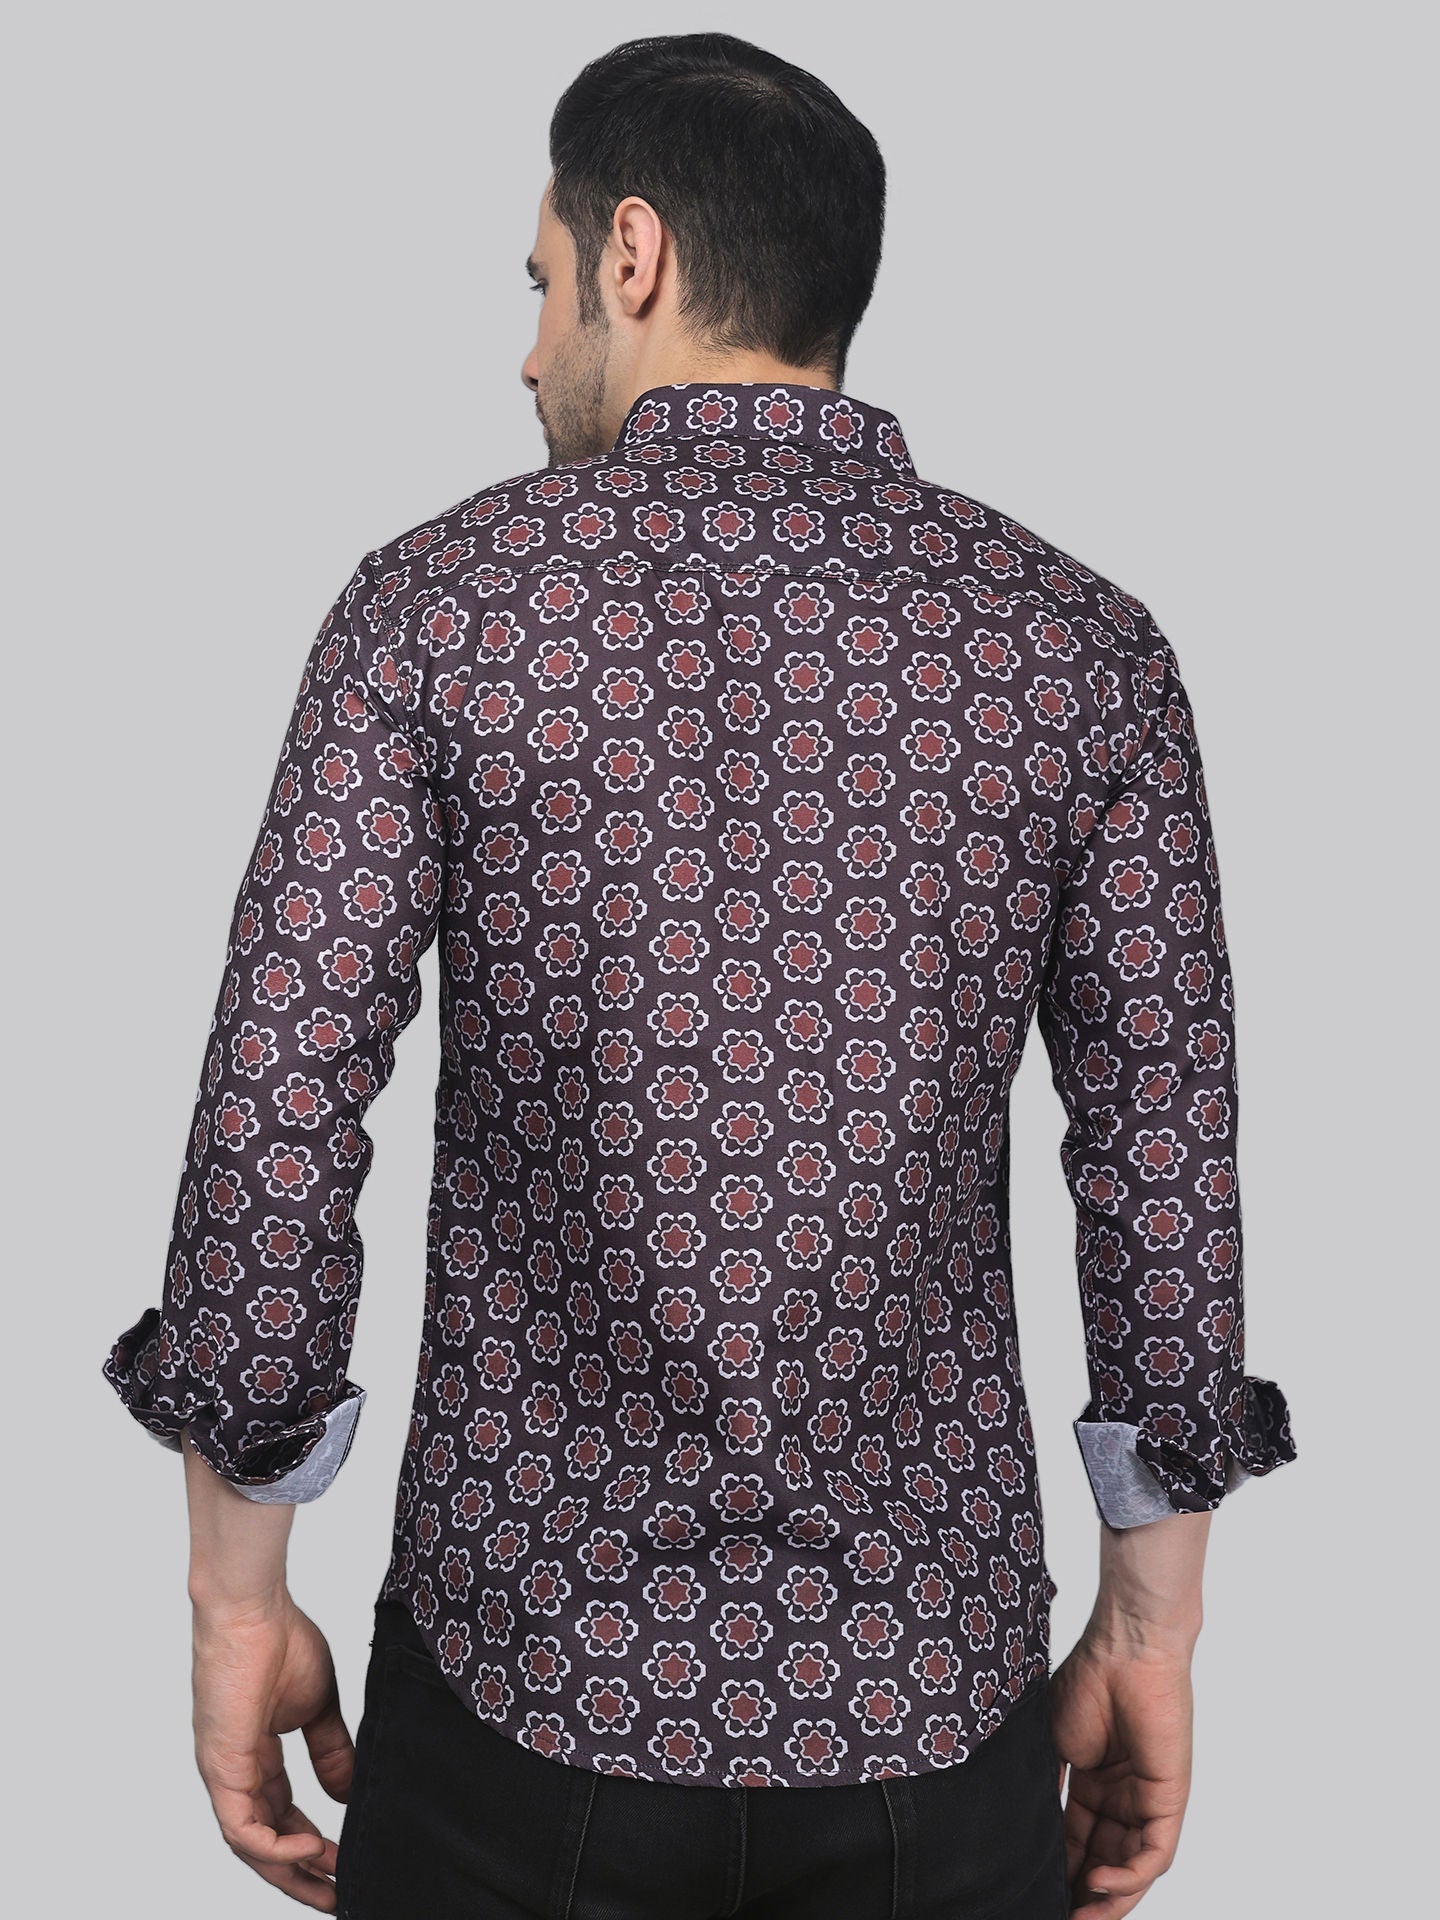 TryBuy Men's Fashionable ‍Full Sleeve Casual Linen Printed shirt - TryBuy® USA🇺🇸